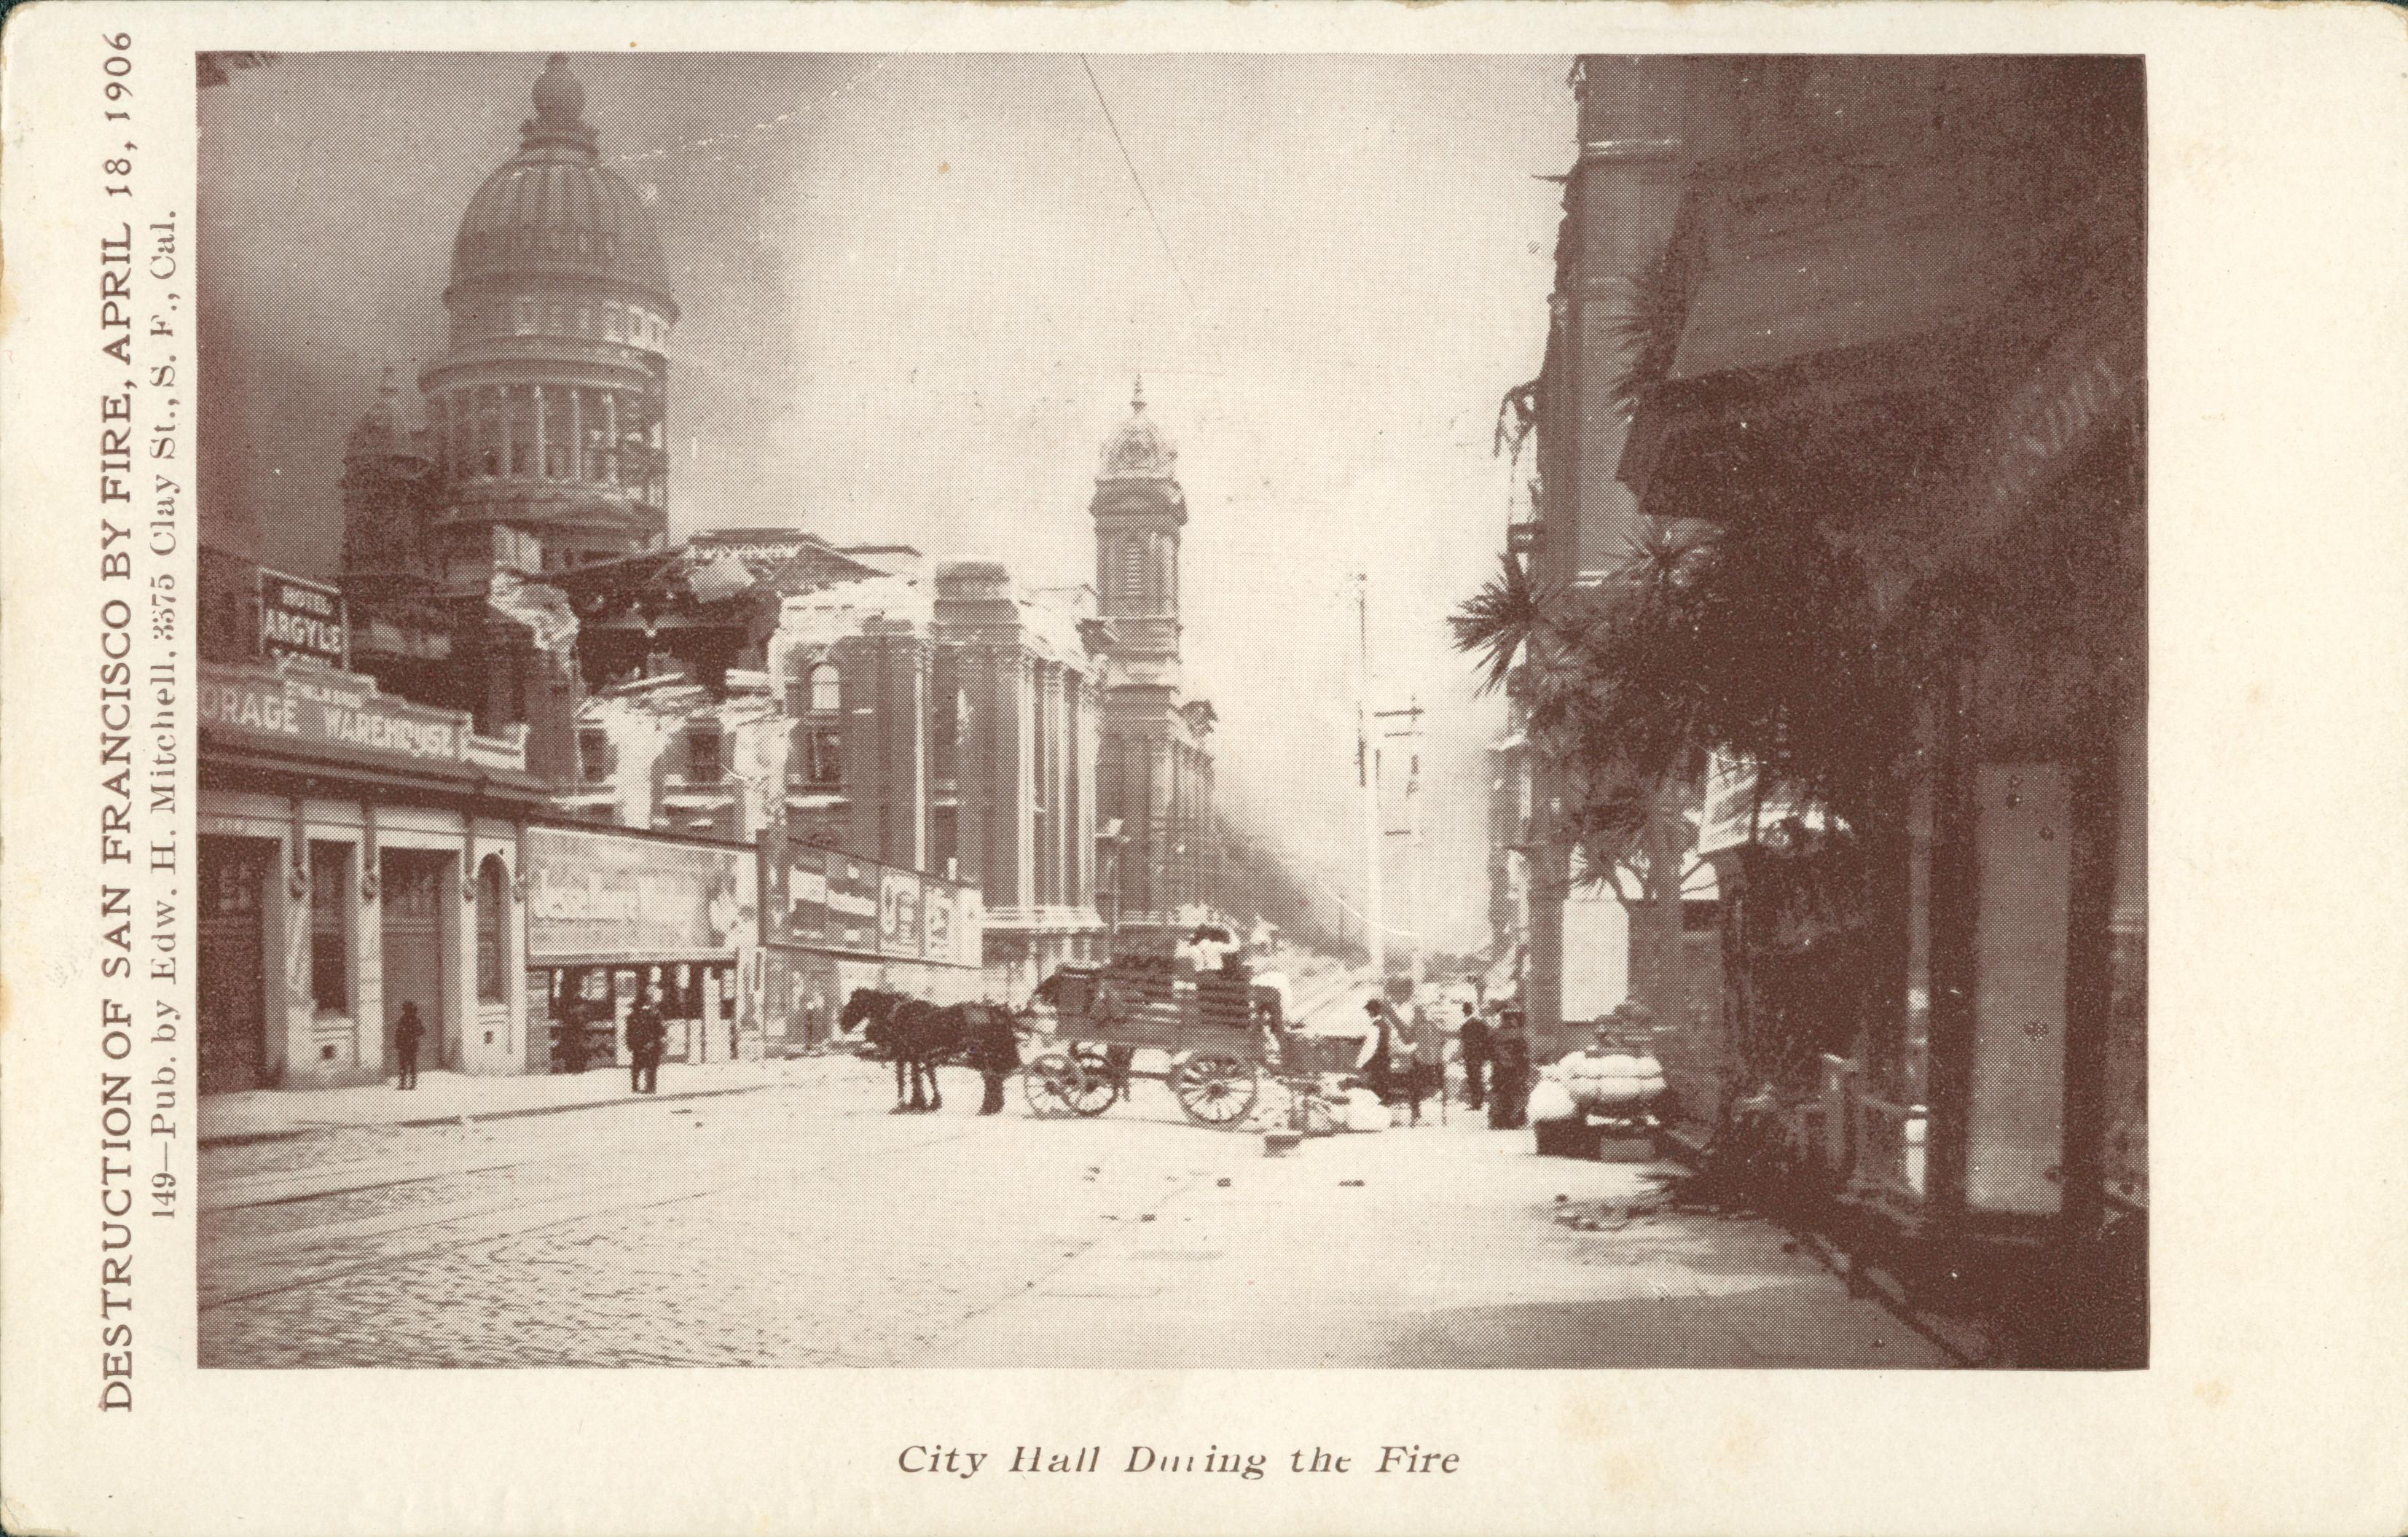 Photo showing City Hall during the fire of 1906.